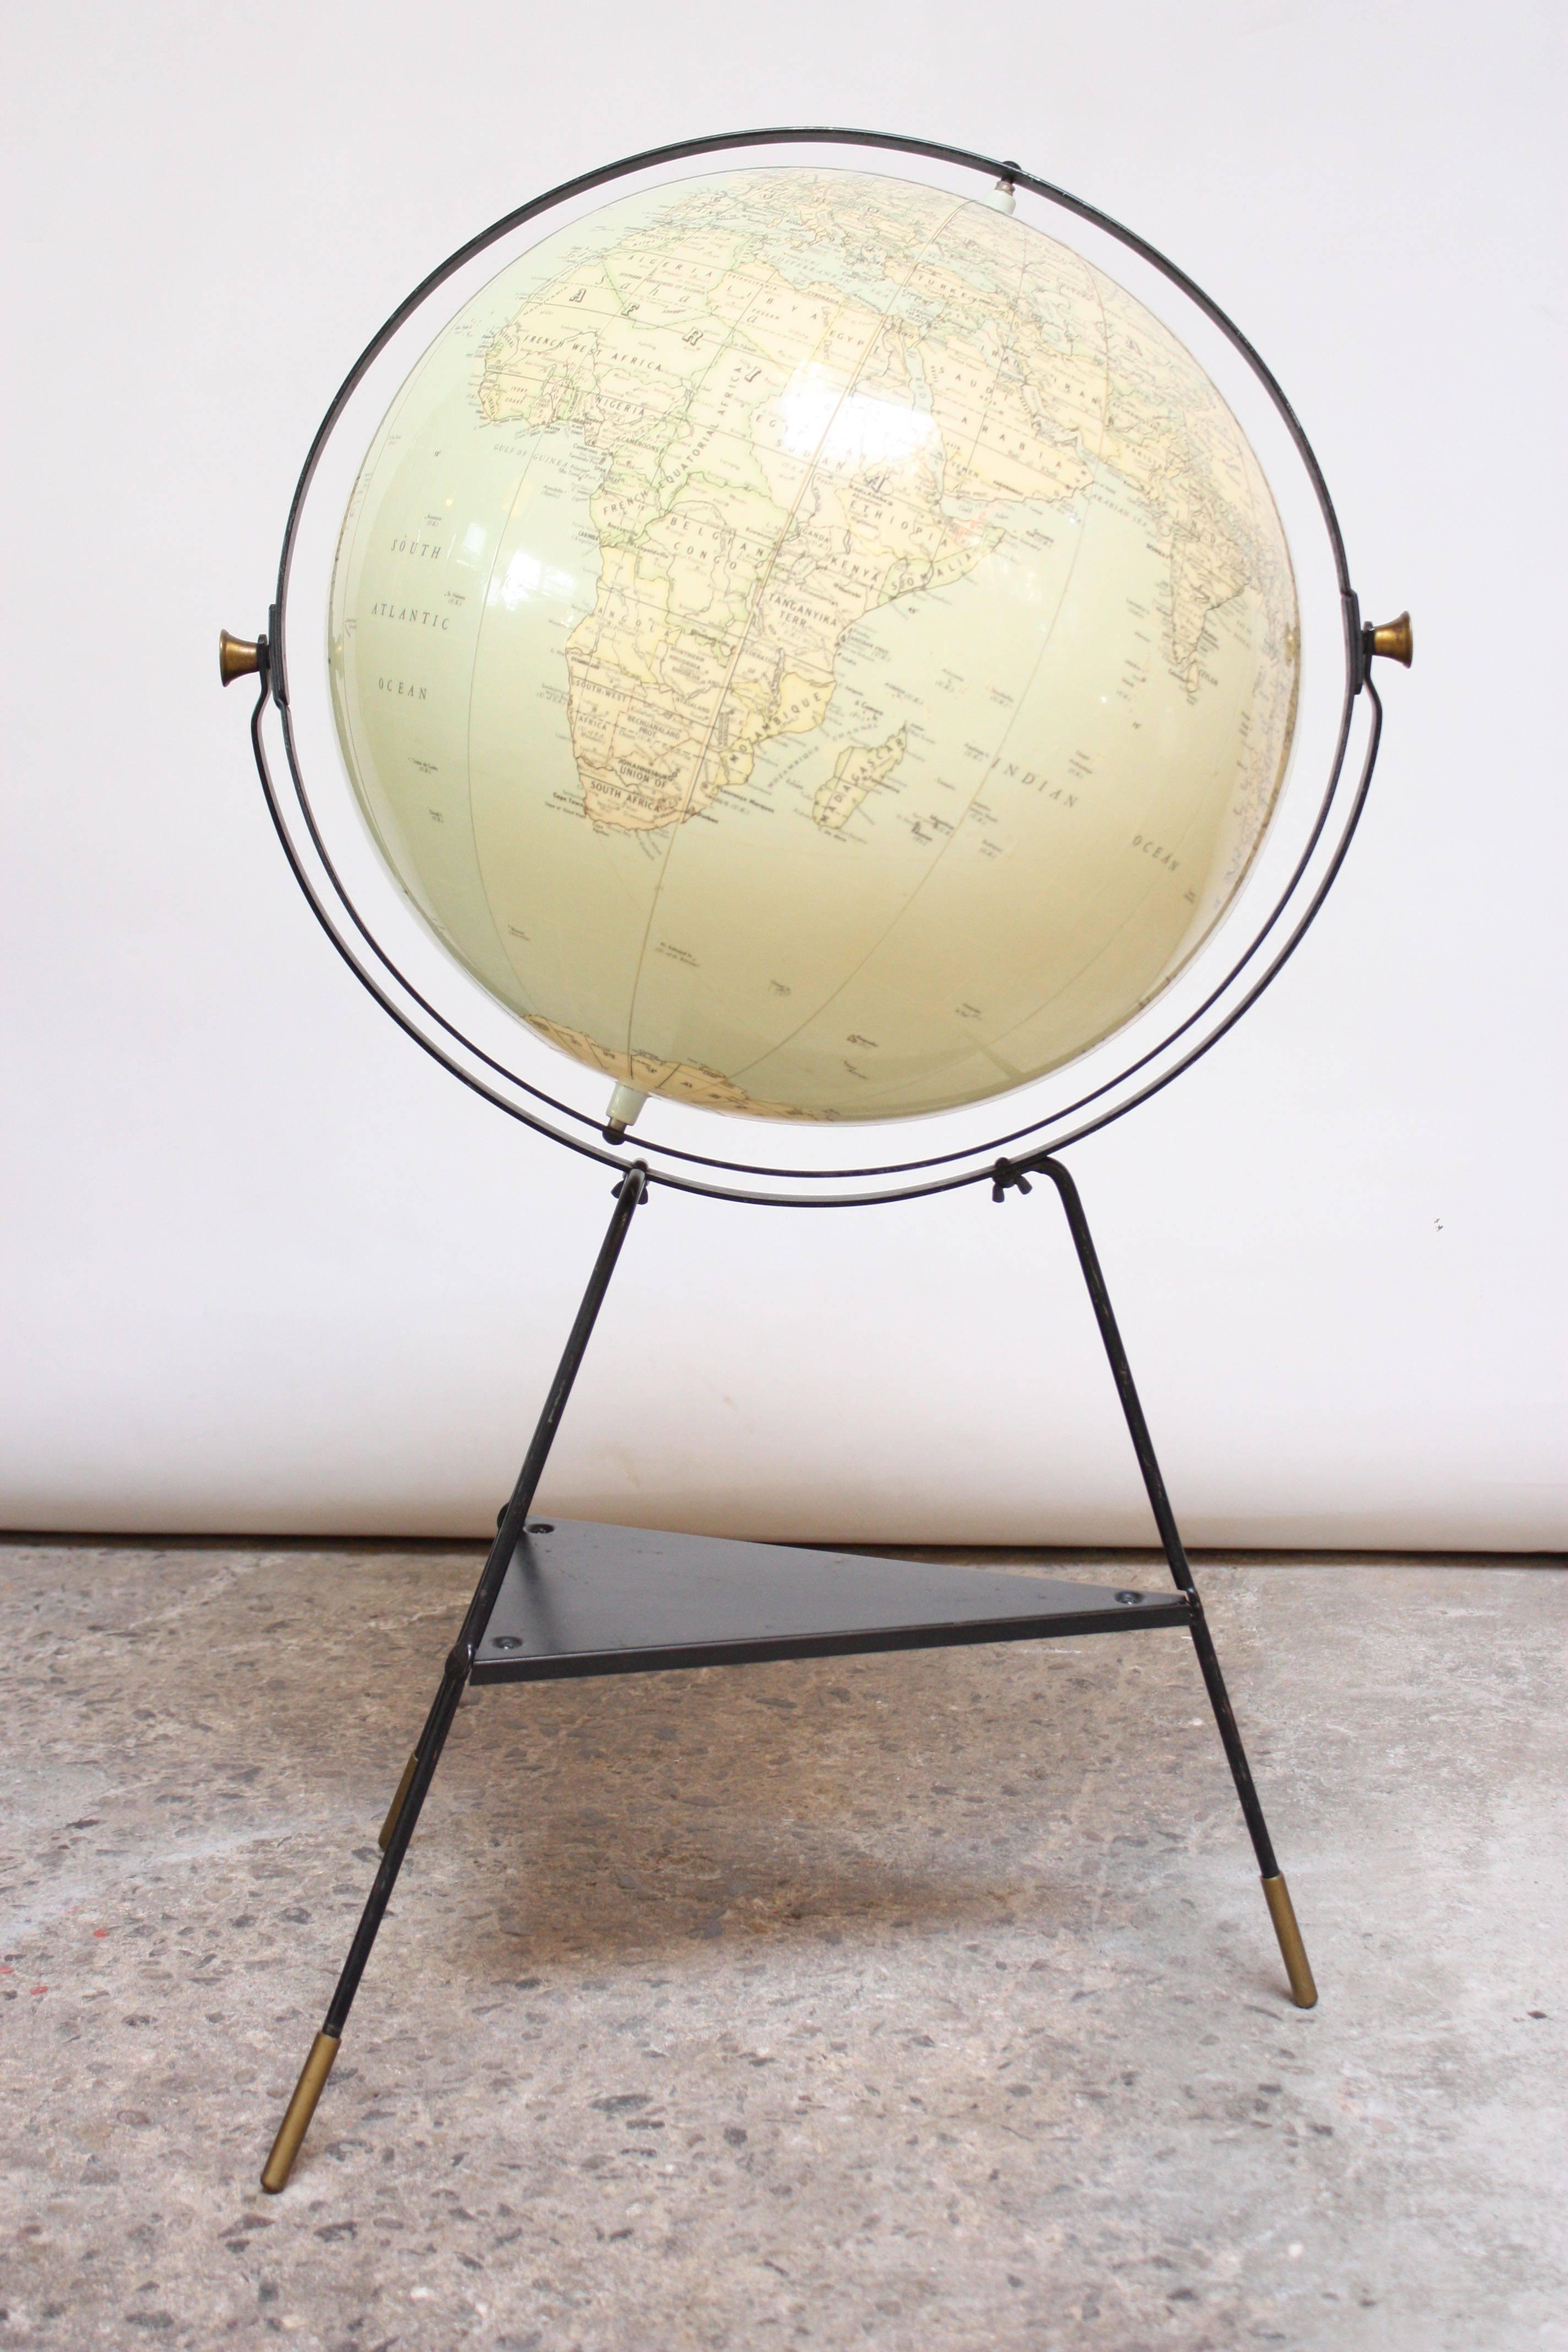 Hammond's International Globe (circa 1955) composed of an inflatable globe on painted metal tripod base. Images and font are large in scale and very legible. As durable as a beach ball, this vinyl globe is inflatable / deflatable by way of a locking